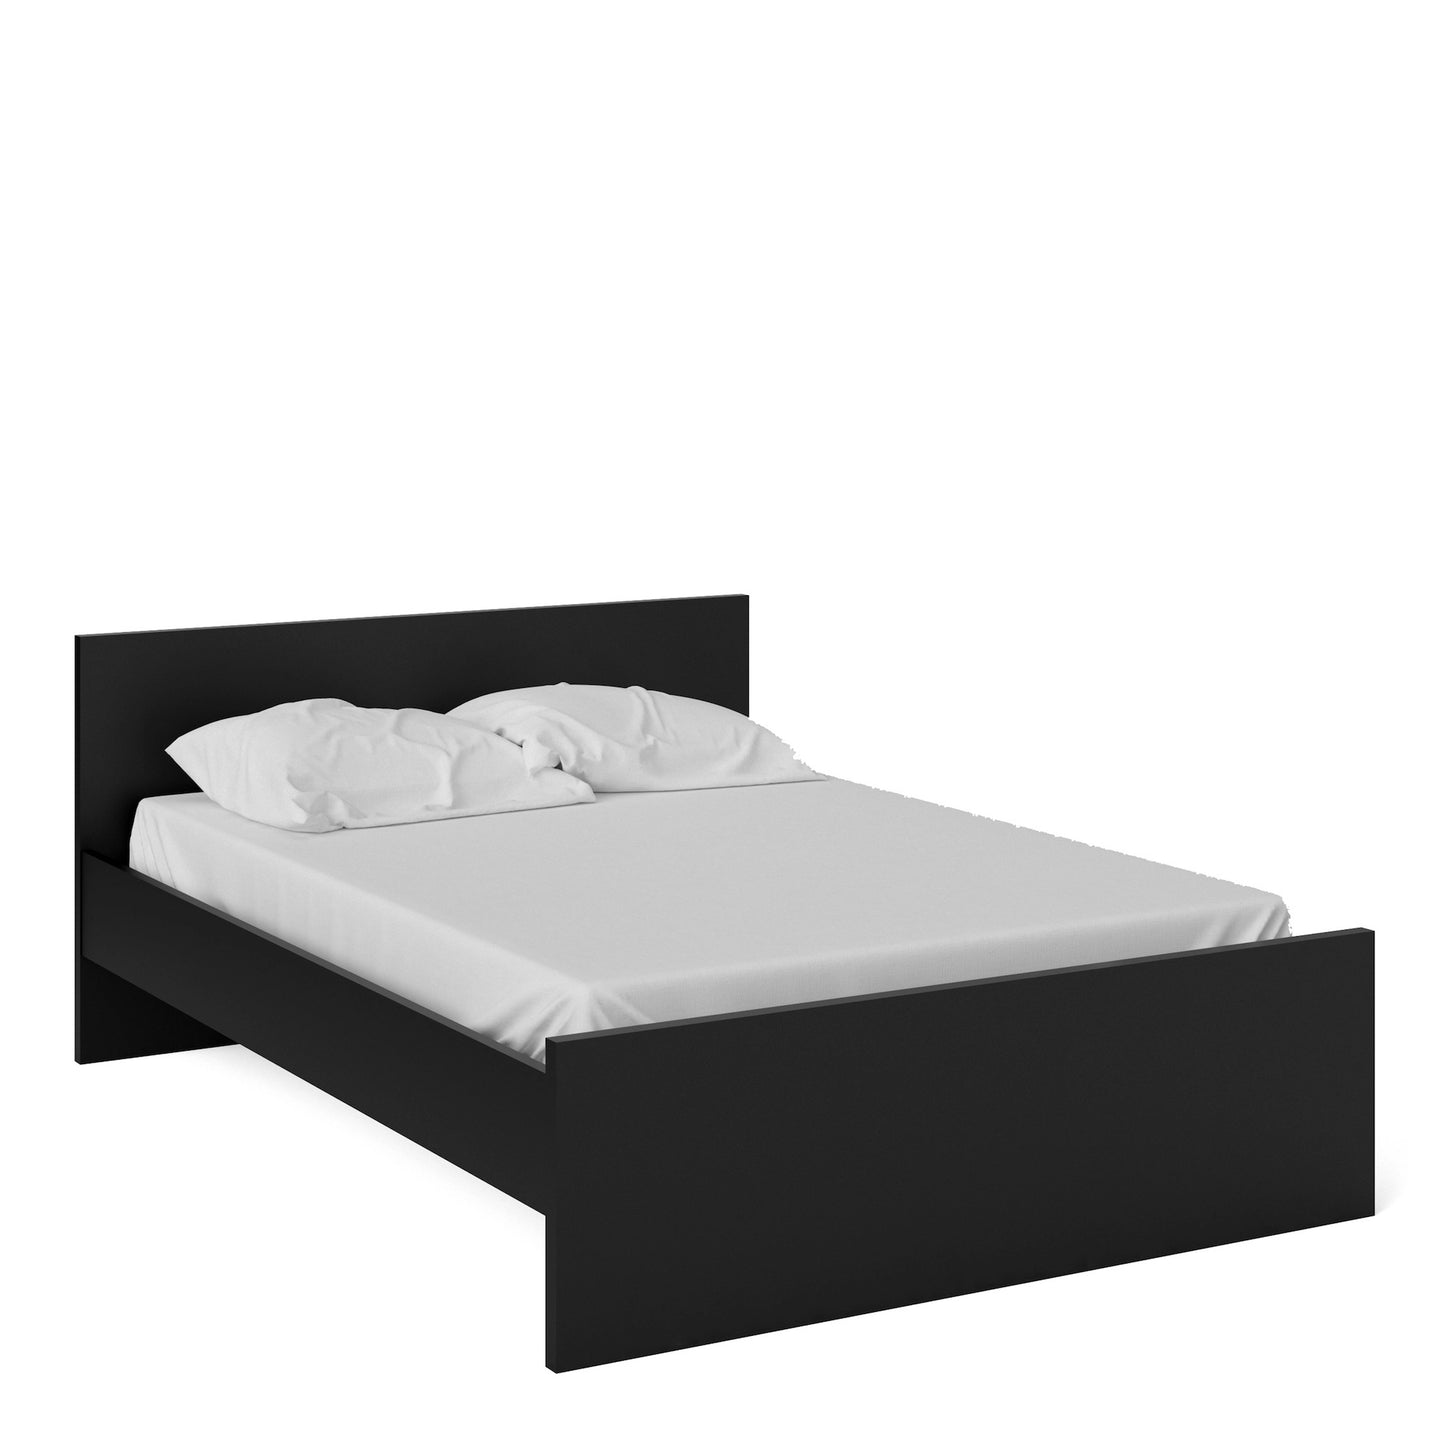 Furniture To Go Naia 4ft 6in Double Bed in Black Matt